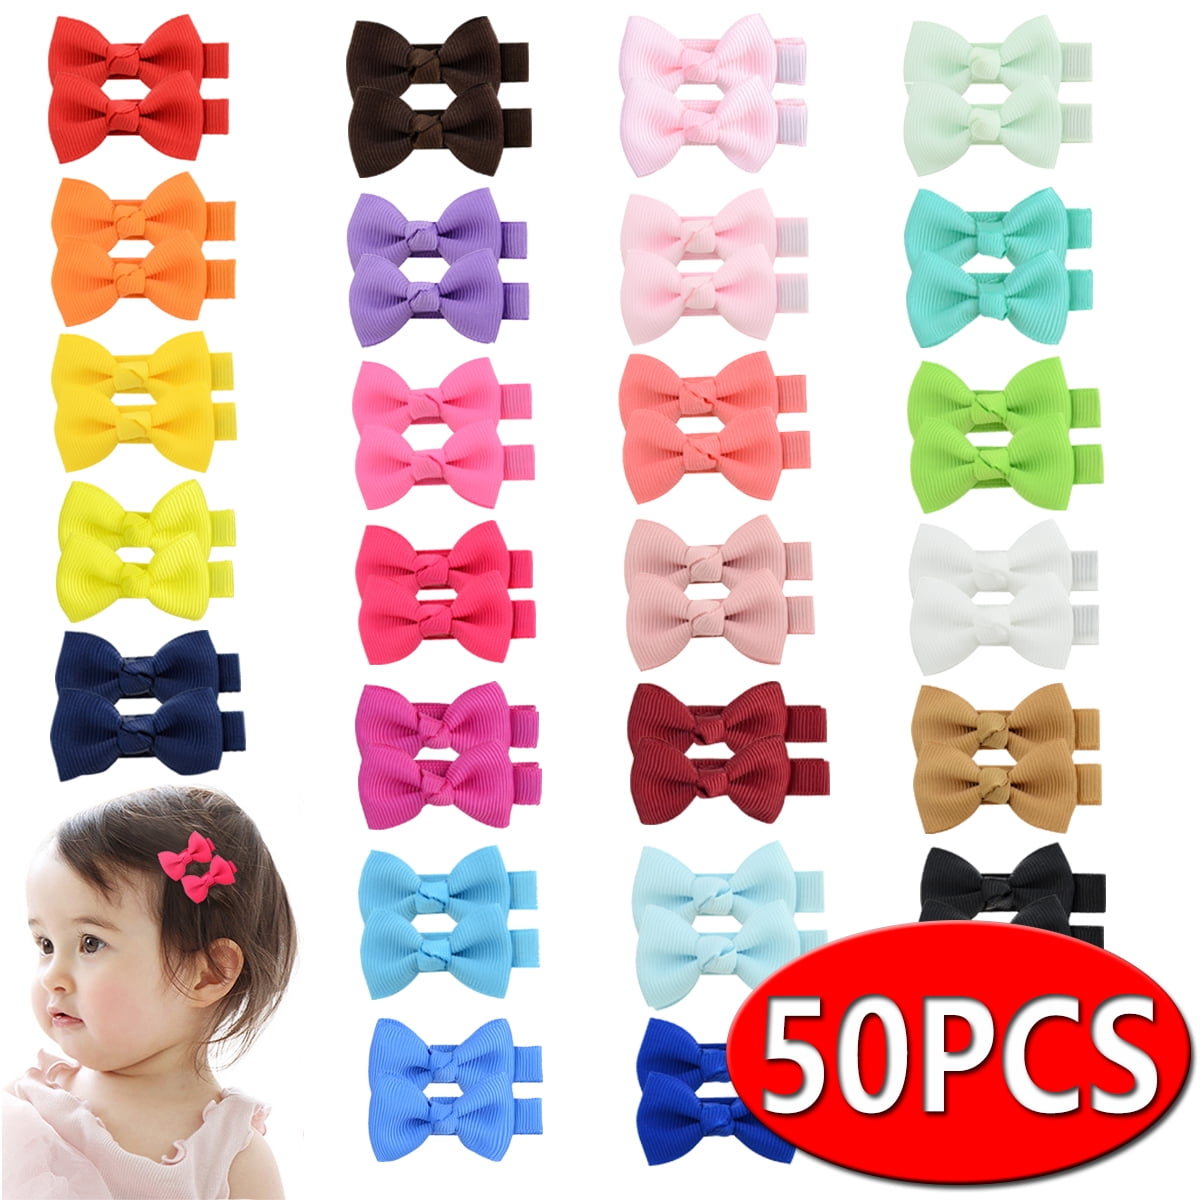 Snap Hair Clips Hair Barrettes for Girls, Southwit 80 Pcs 2 inch Non-Slip Barrettes Hair Accessories for Girls, Women, Kids Teens or Toddlers